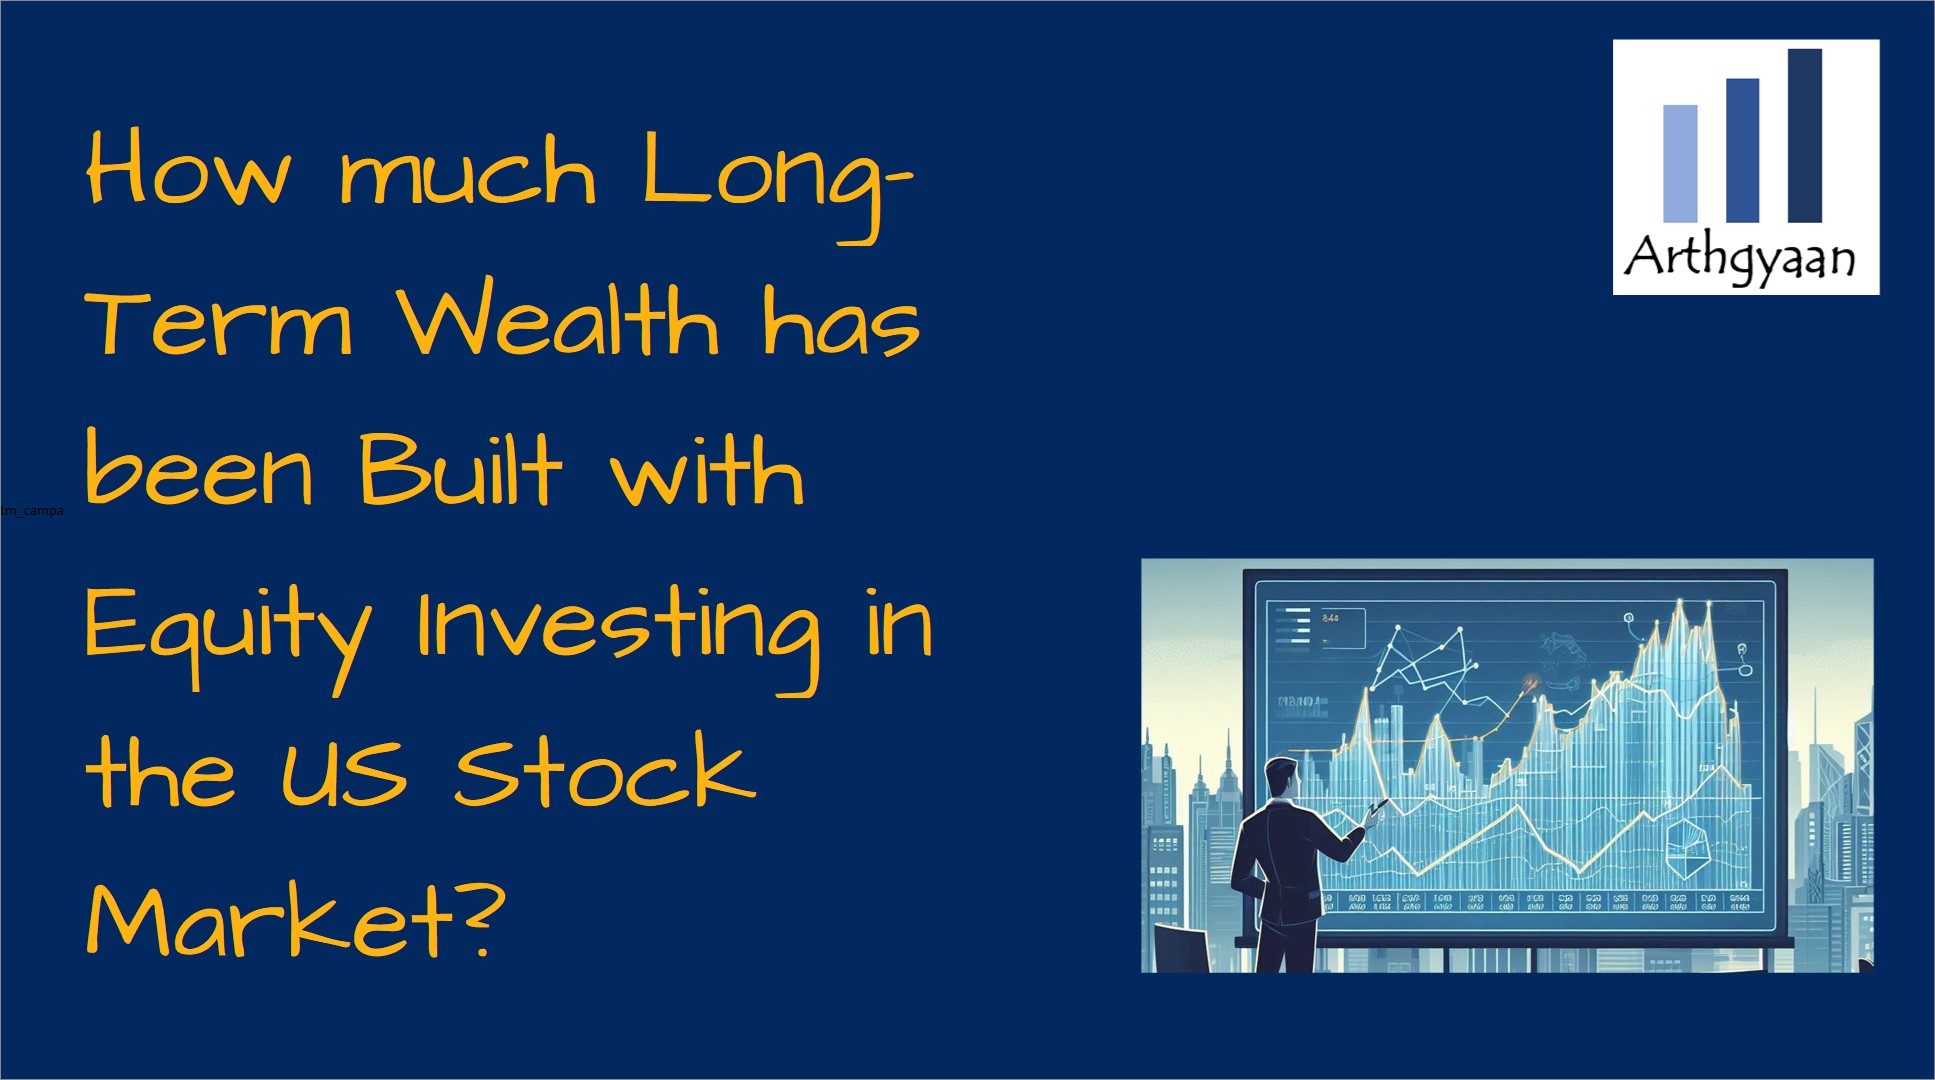 How much Long-Term Wealth has been Built with Equity Investing in the US Stock Market?